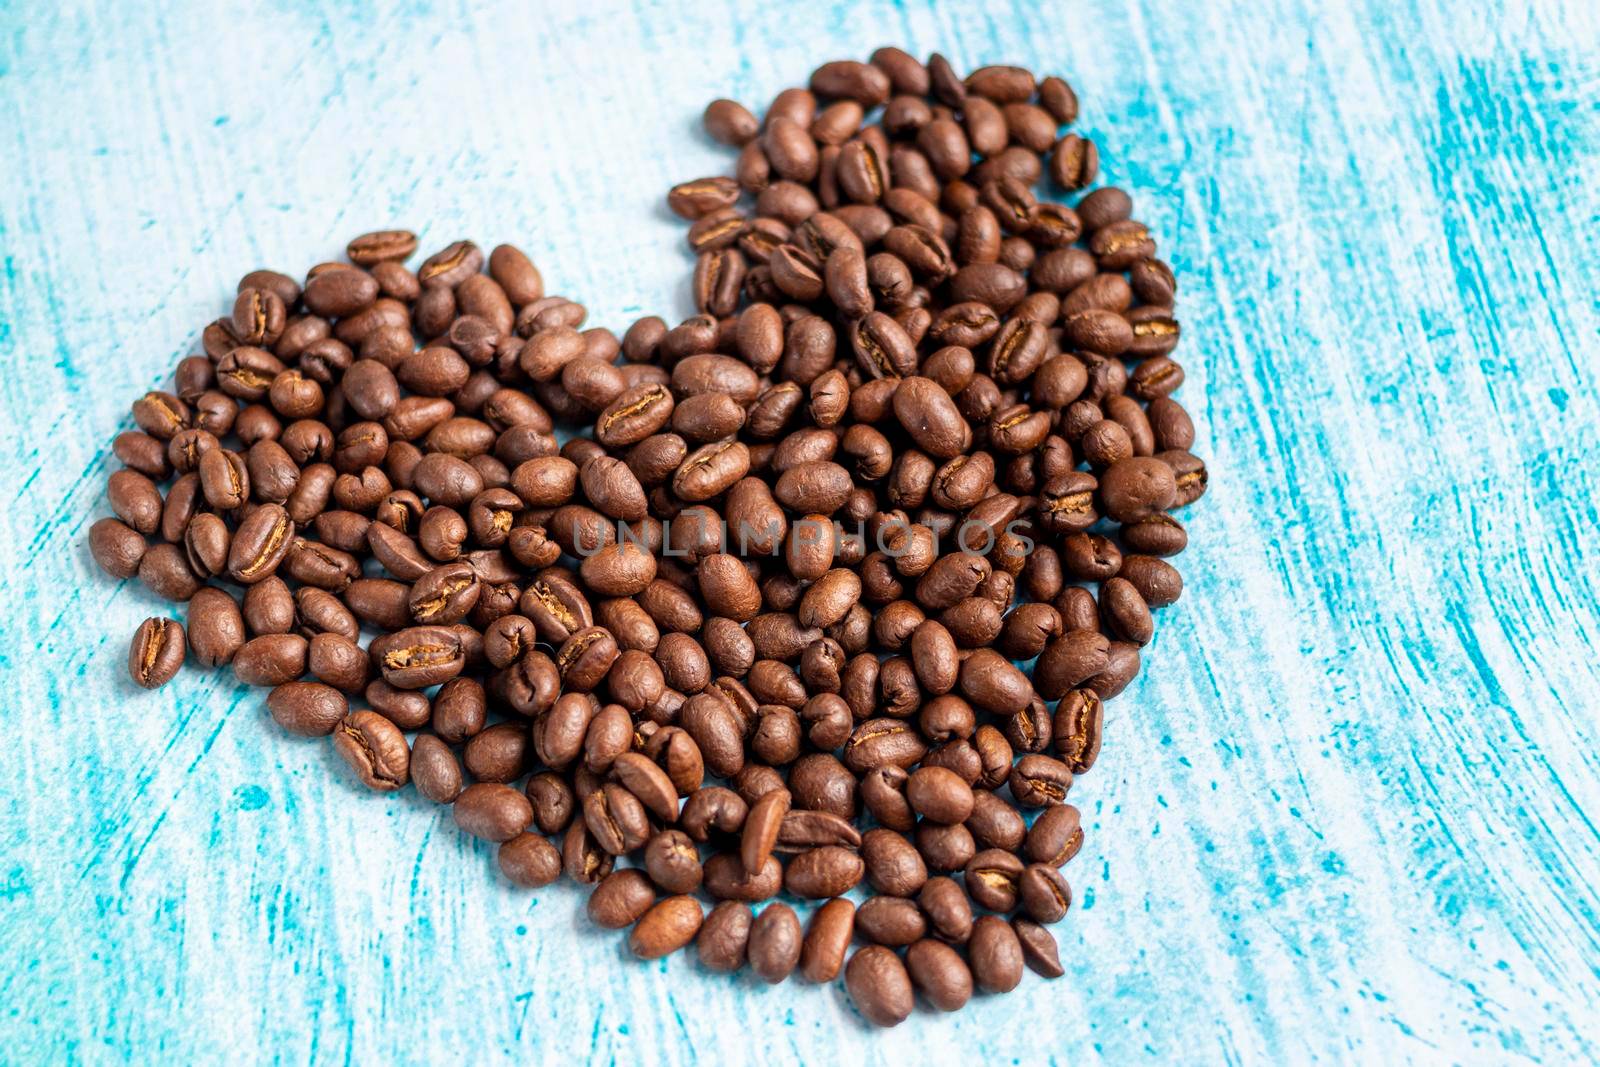 Heart shaped coffee grains on aquamarine background by eagg13